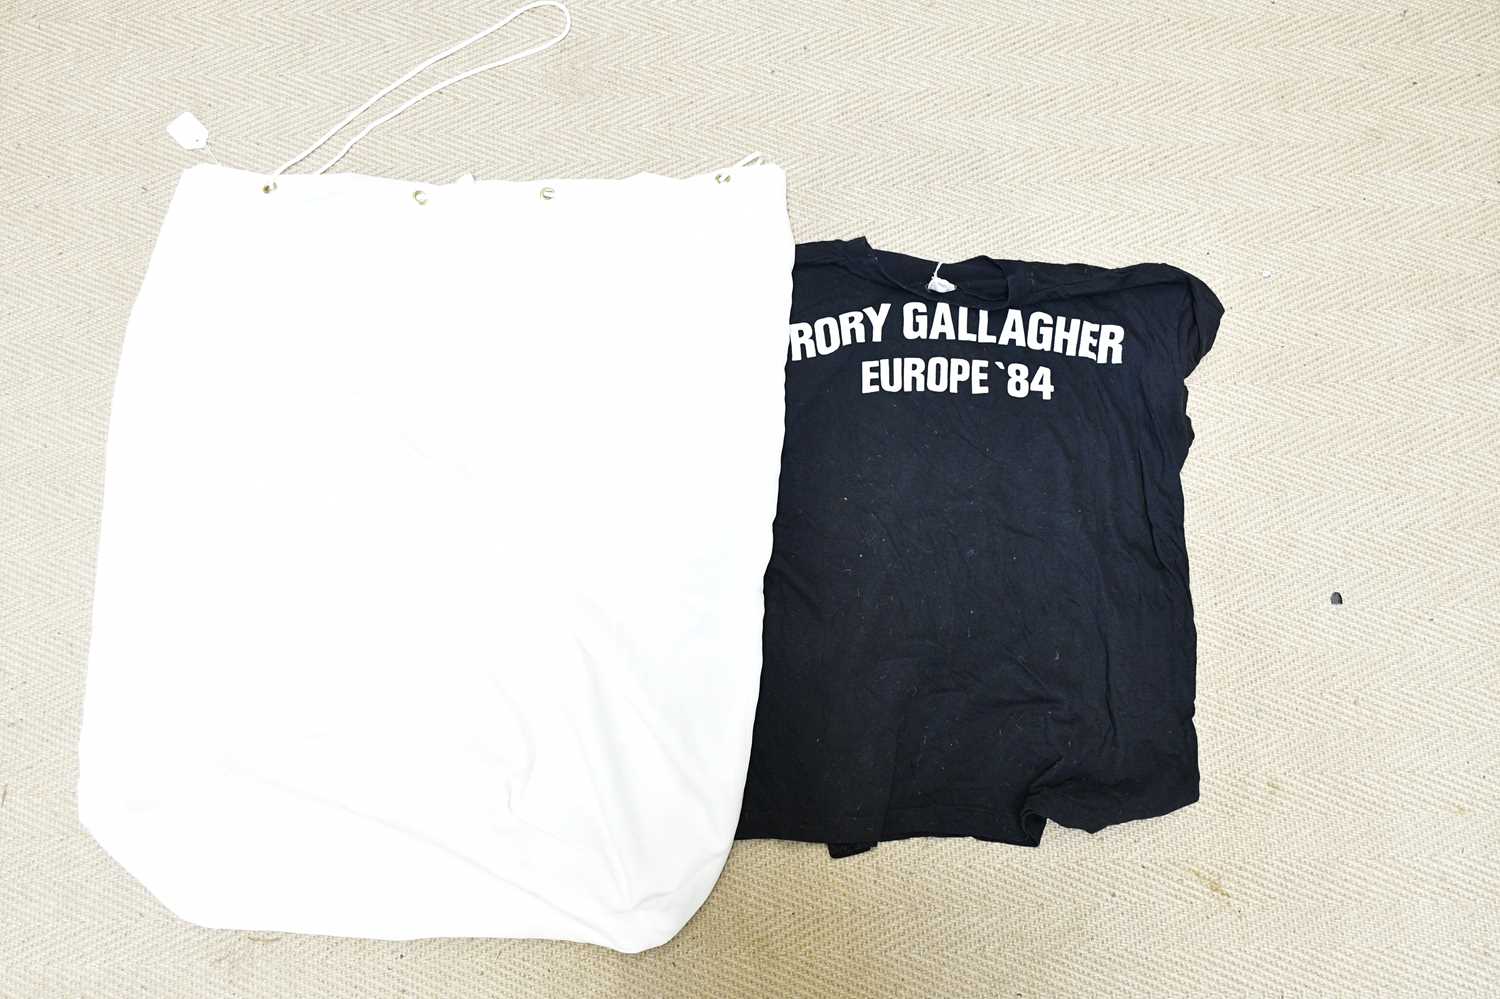 RORY GALLAGHER; a tour crew T-shirt for Europe 1984, together with a Keane laundry bag. - Image 5 of 5